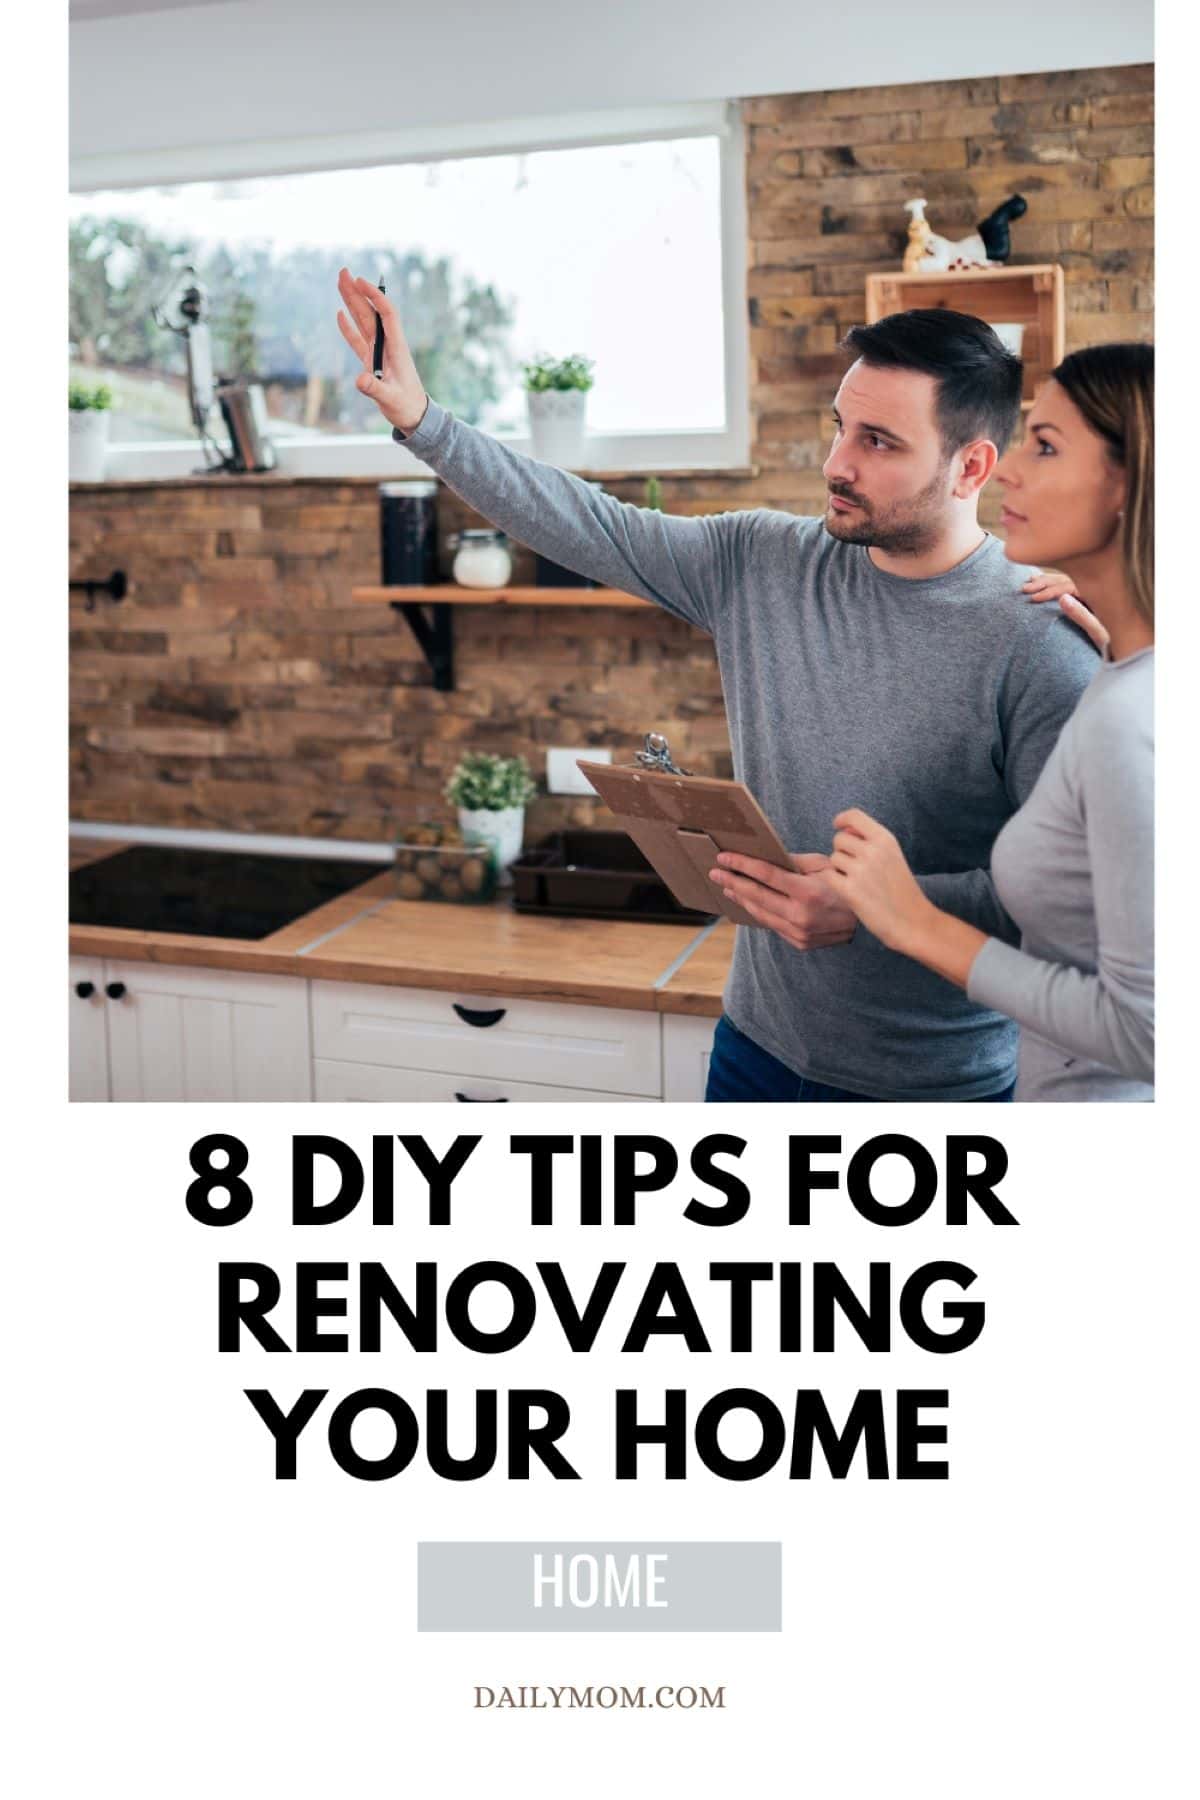 8 Essential Home Renovation Ideas For Every Room &Amp; Diy Home Remodeling Tips 9 Daily Mom, Magazine For Families